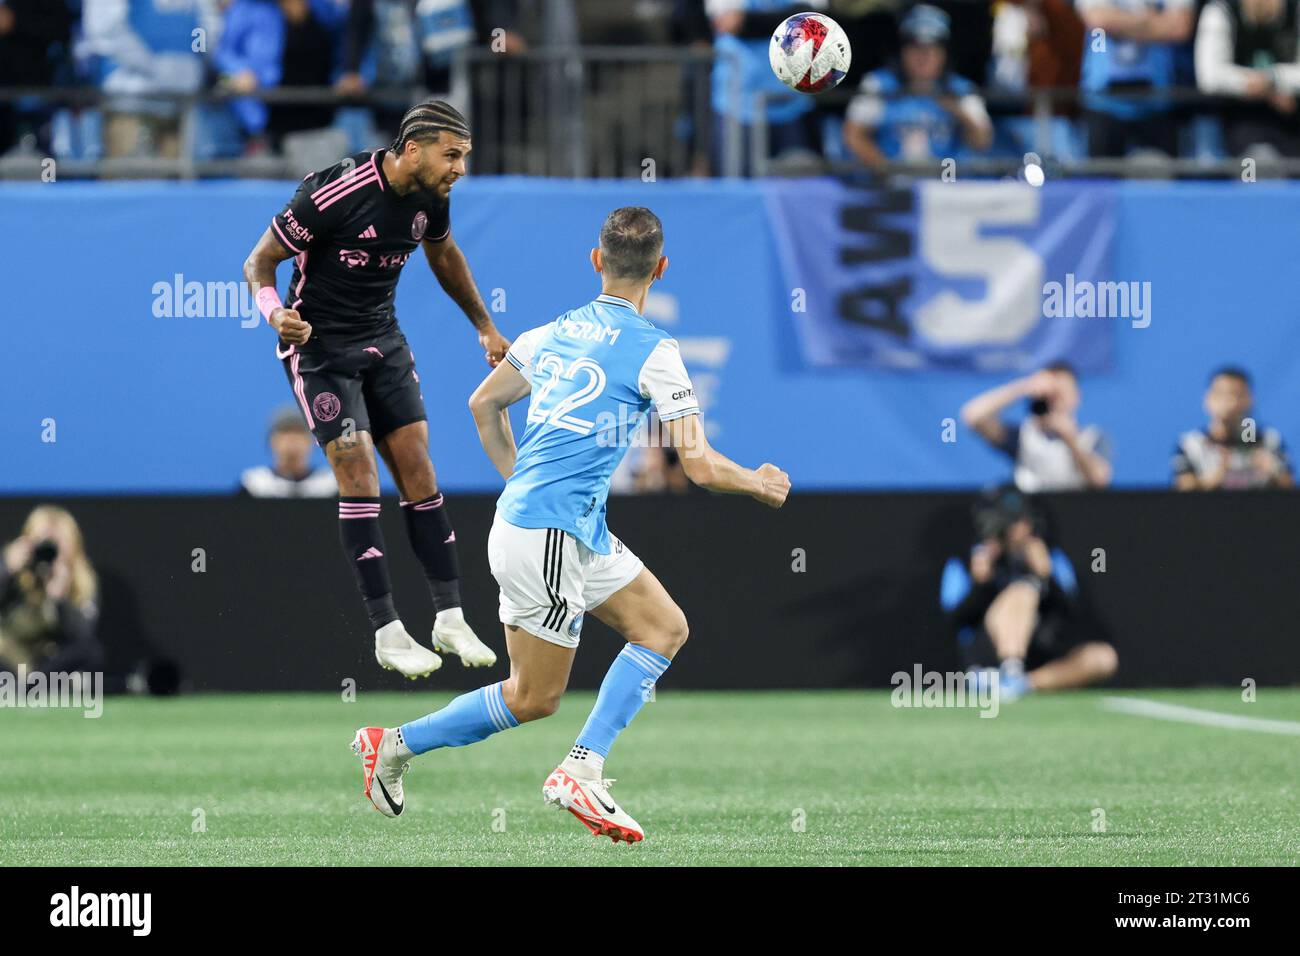 Charlotte, North Carolina, USA. 21st Oct, 2023. Inter Miami defender DeAndre Yedlin (2) heads the ball during the MLS soccer match between Inter Miami CF and Charlotte FC at Bank of America Stadium in Charlotte, North Carolina. Greg Atkins/CSM/Alamy Live News Stock Photo